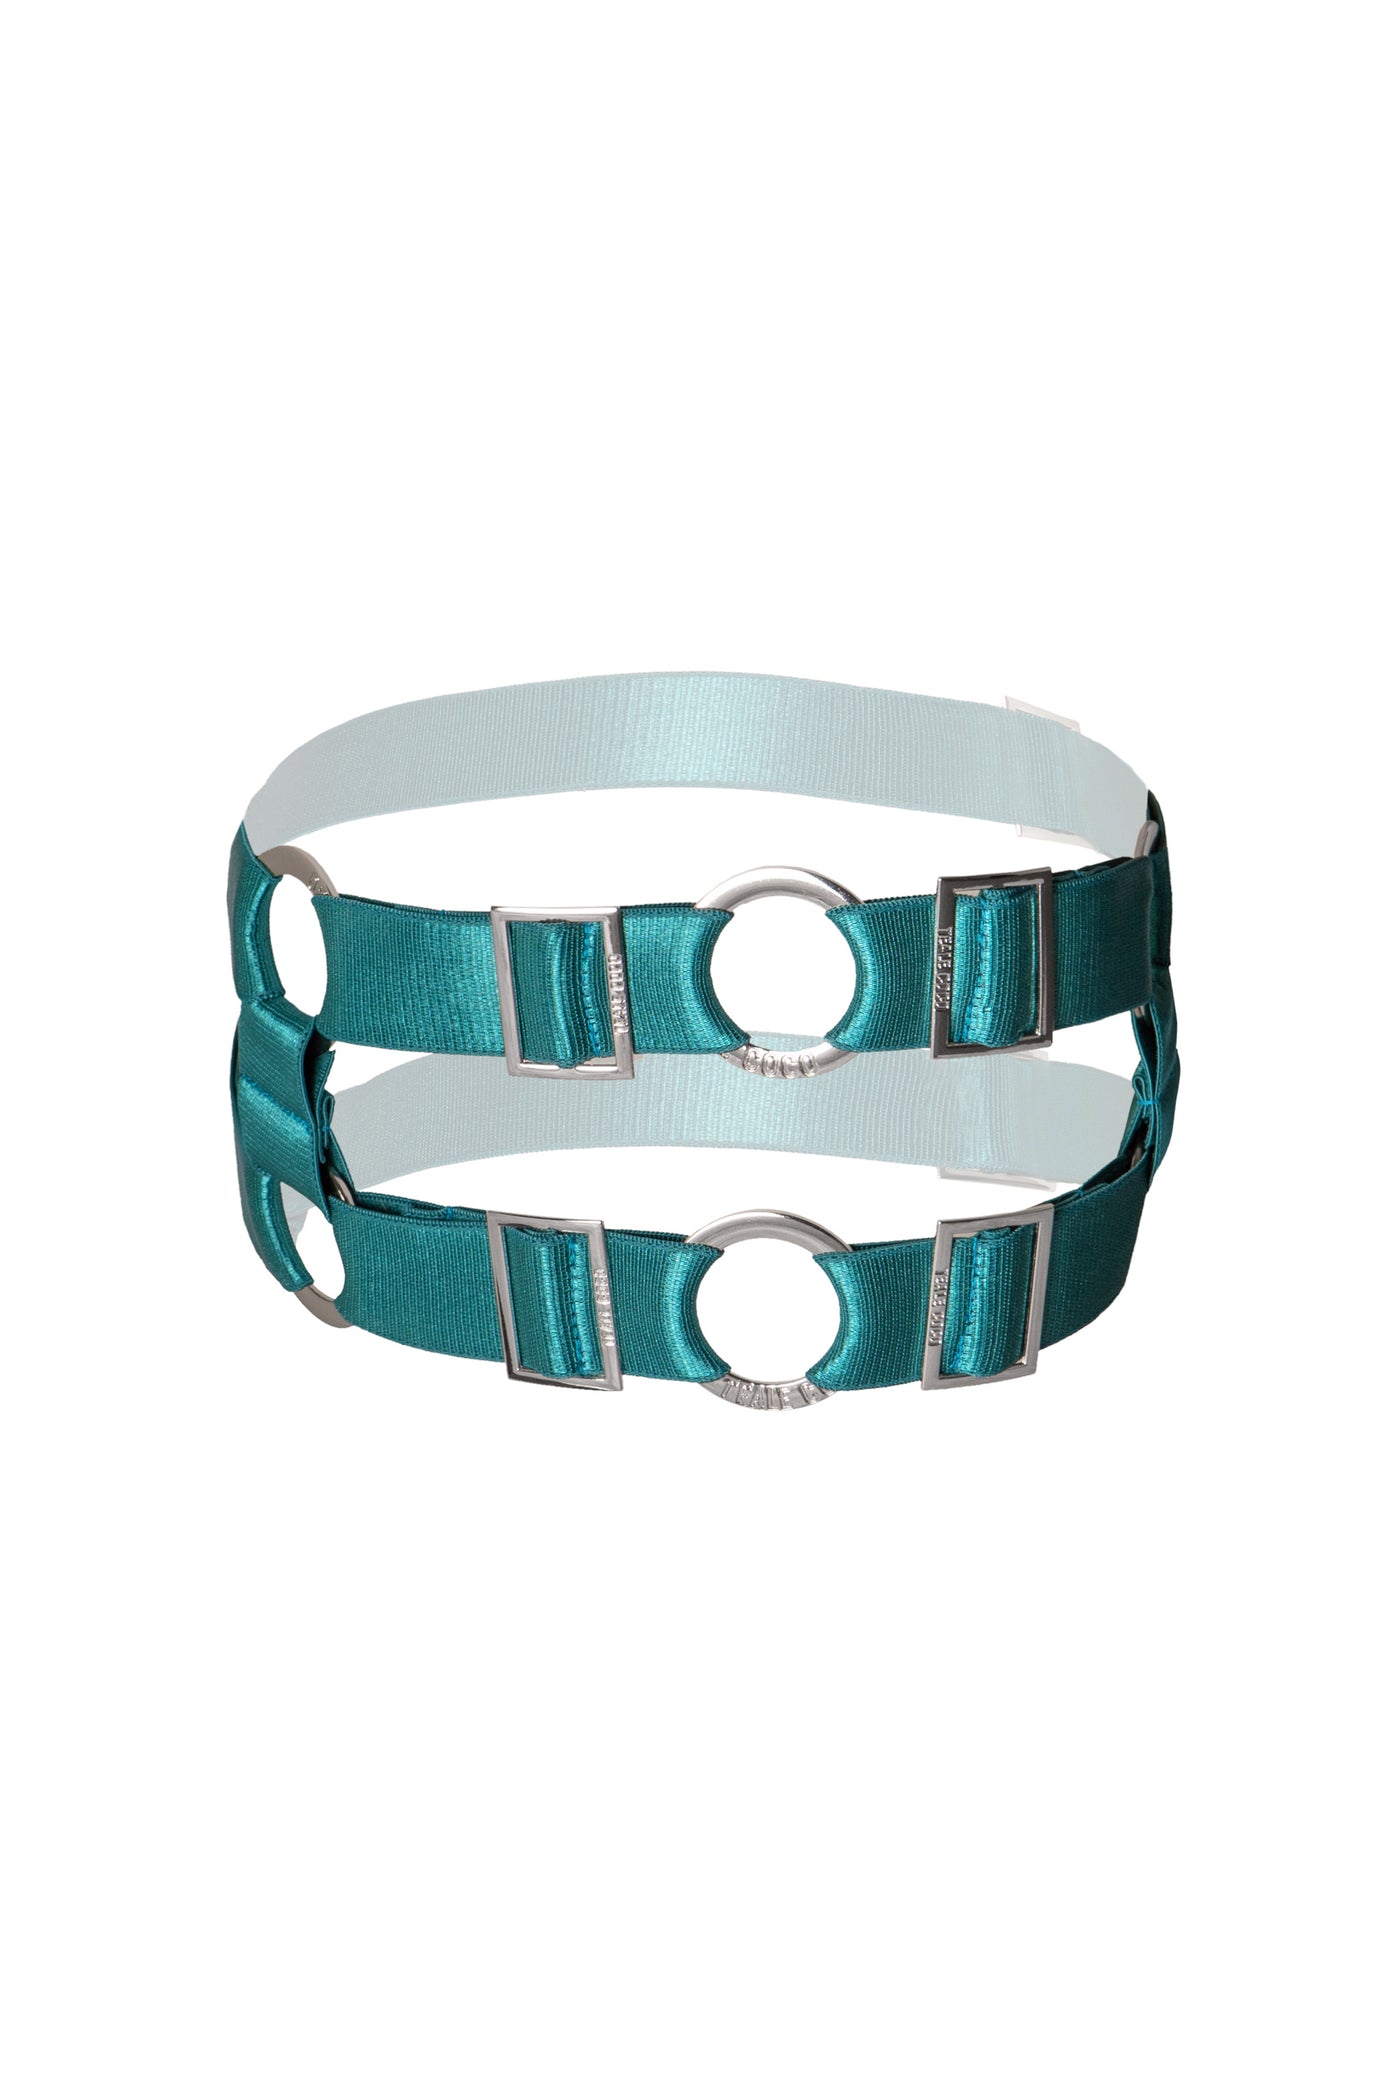 Viper Choker - With Crystal Options (Teal)